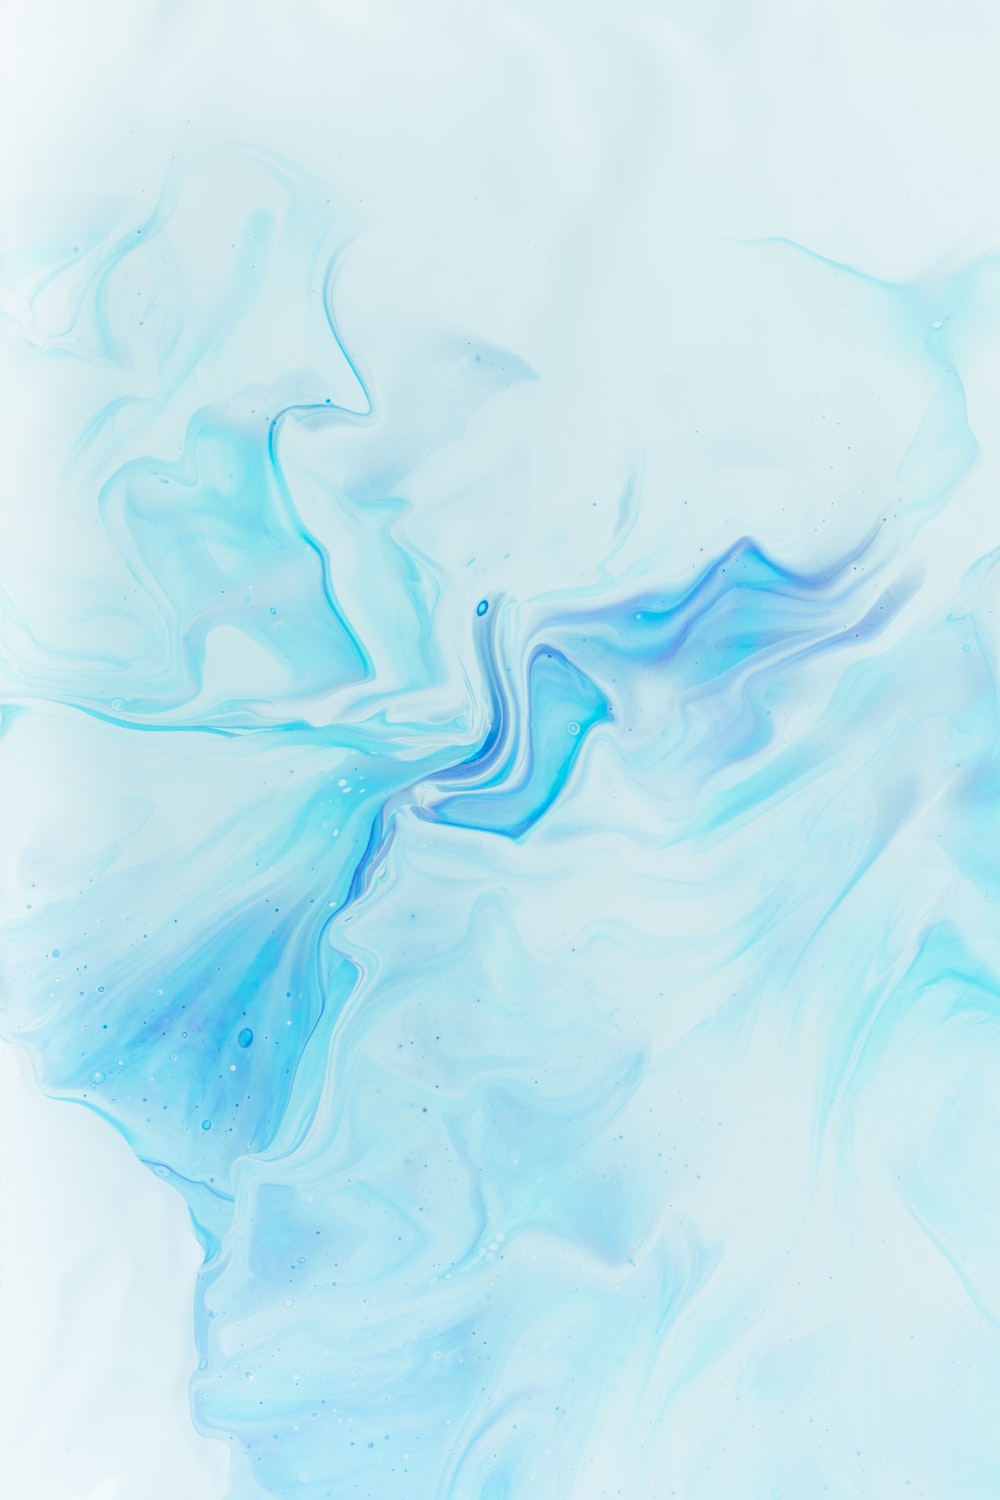 Blue Abstract Picture. Download Free Image